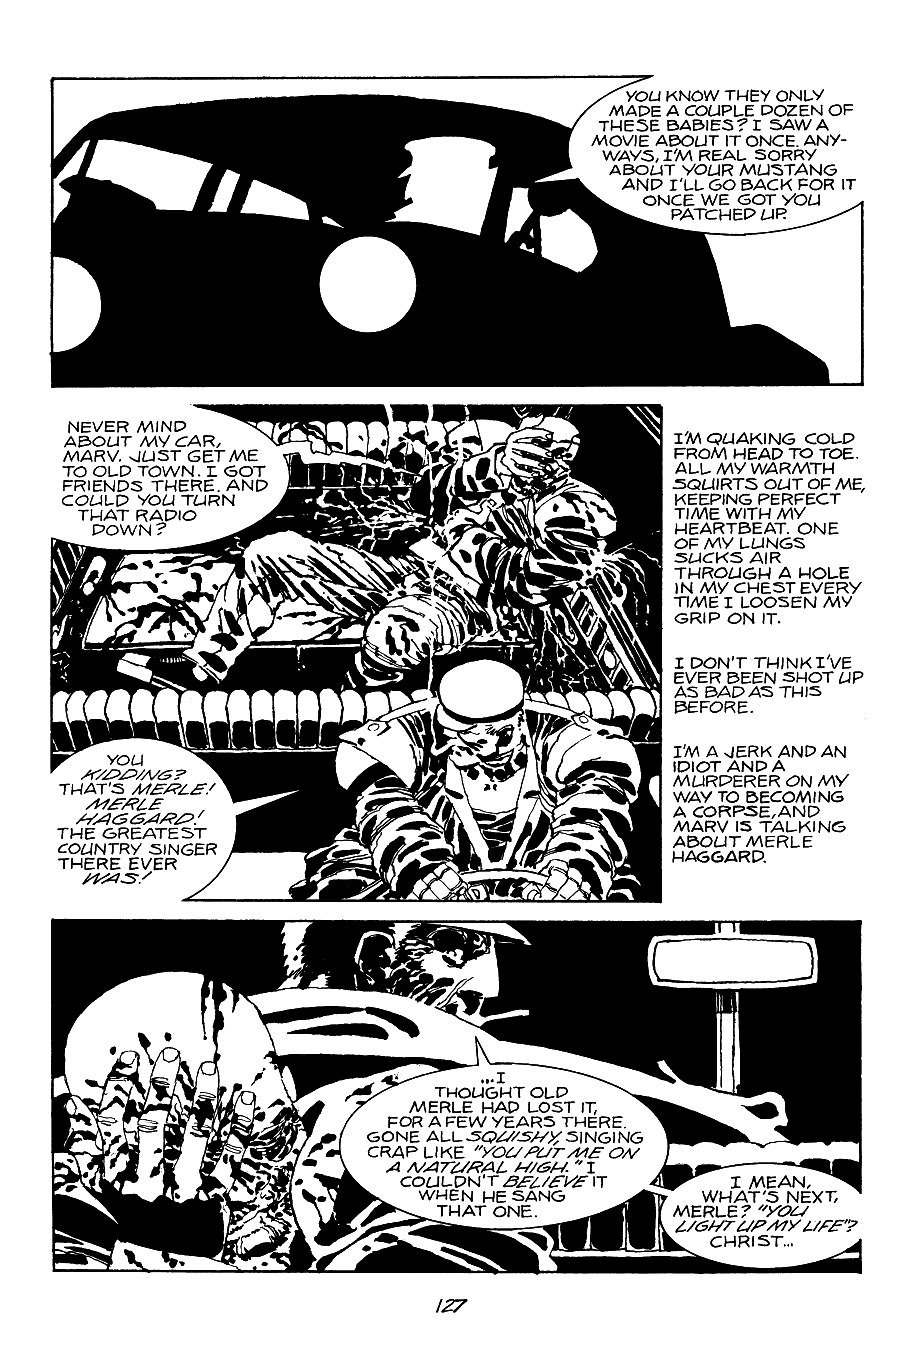 page 127 of sin city 2 the hard goodbye